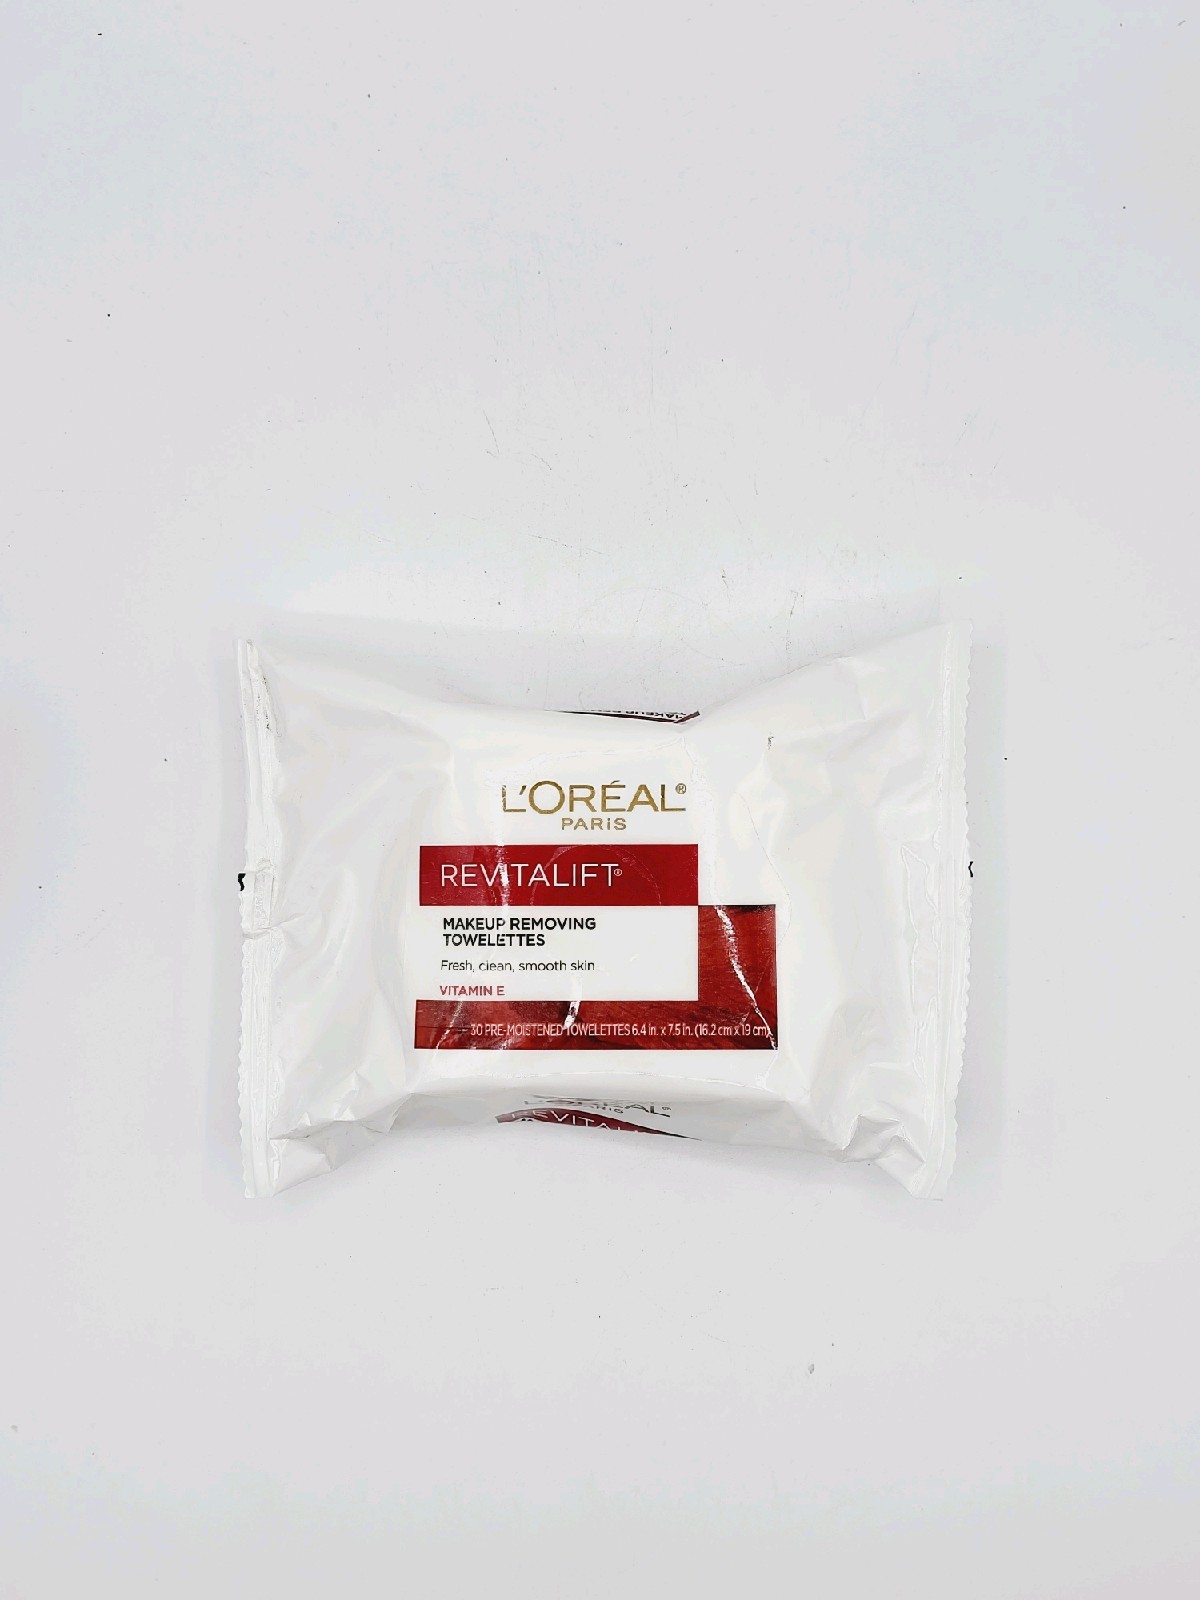 L'Oreal Revitalift Makeup Removing Towelettes 30 Count